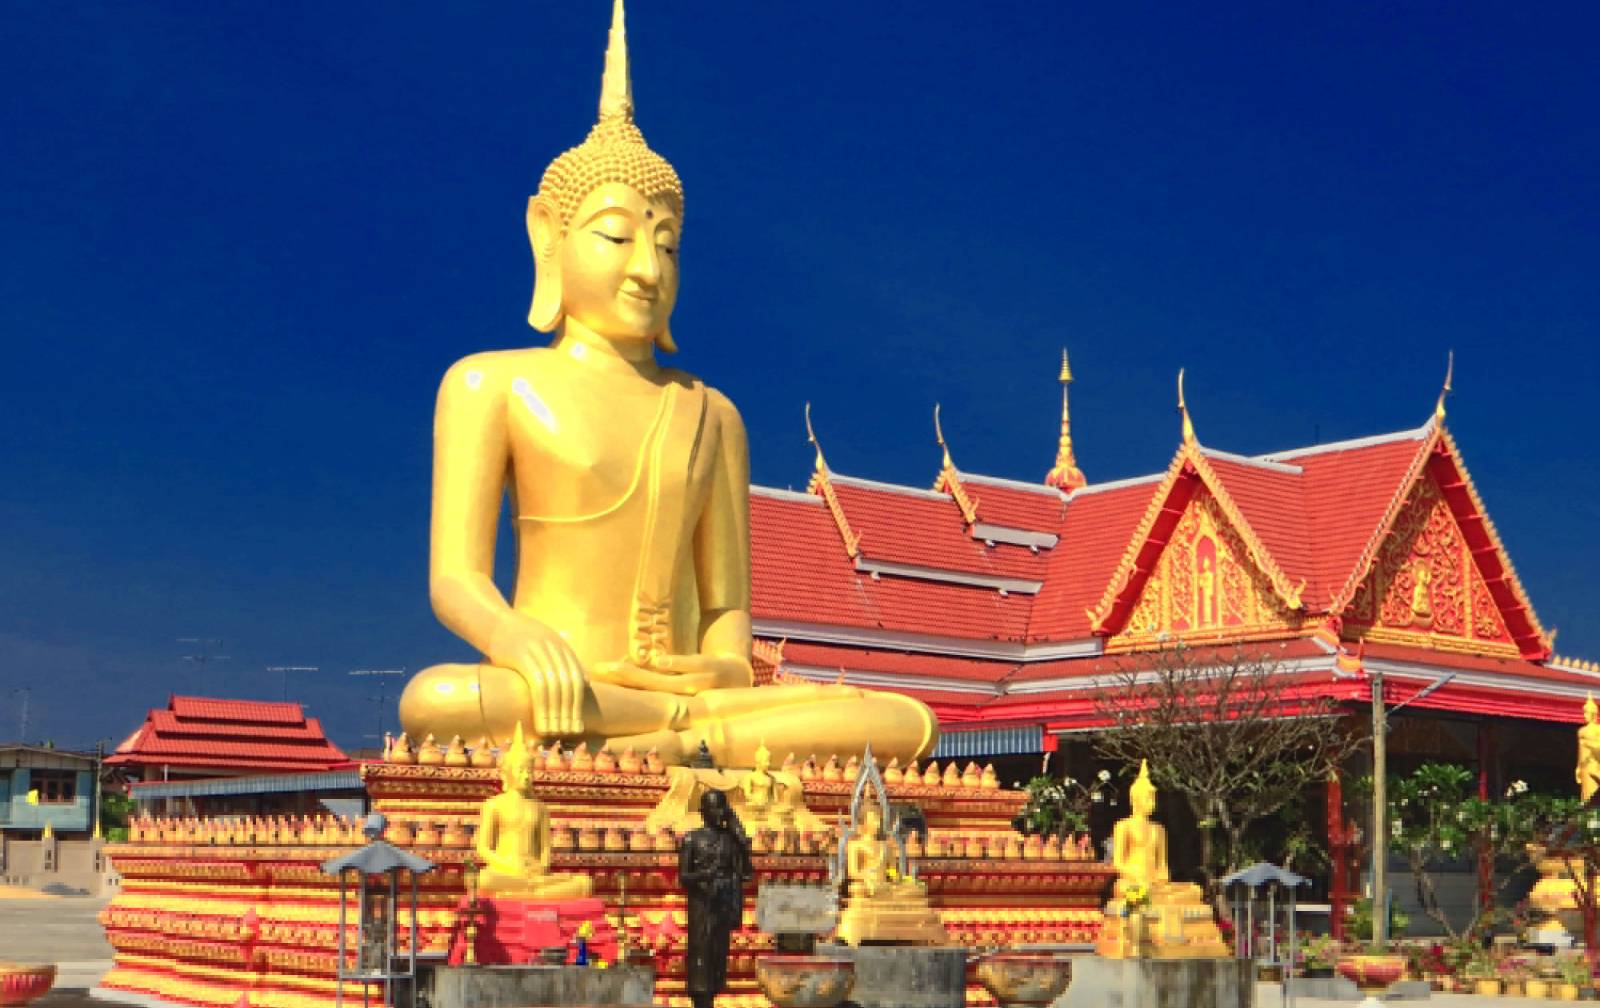 Thailand Tour Packages from the USA